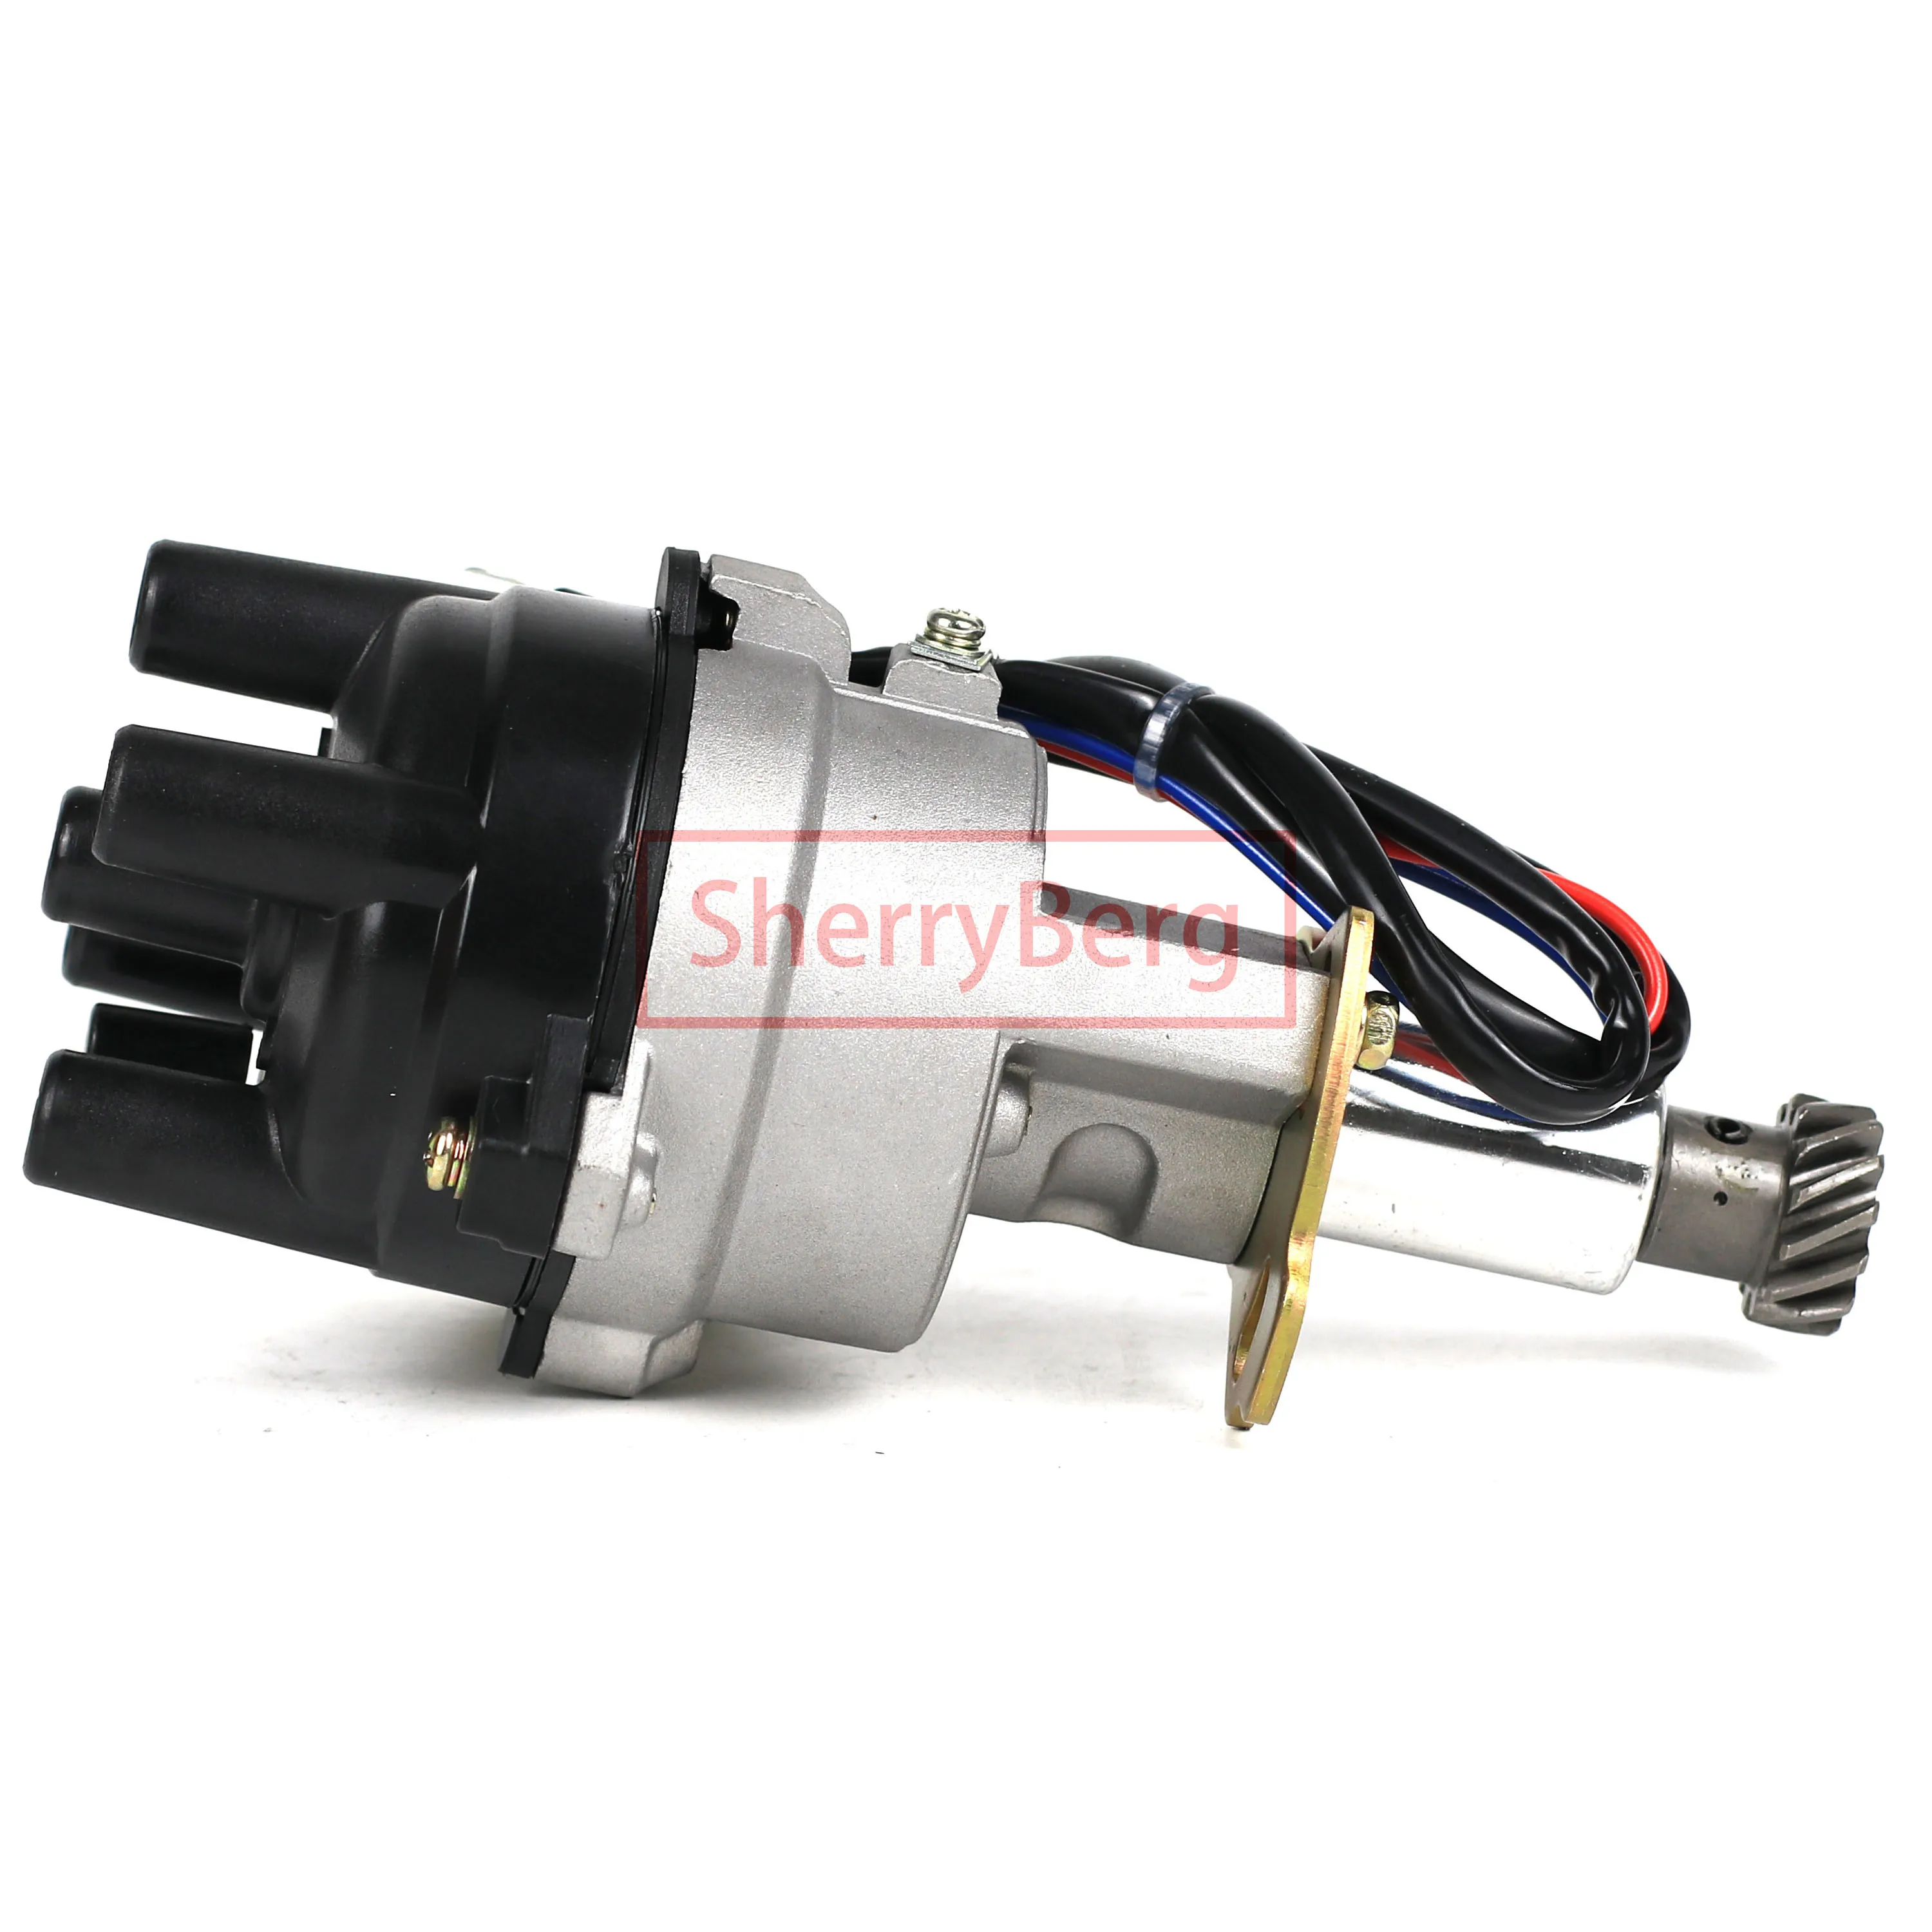 

SherryBerg 4-cyl Electronic Complete Distributor fit FOR NISSAN Sunny B110 B120 B210 B310 A10 A12 A14 A15 A13 22100-24B01 NEW